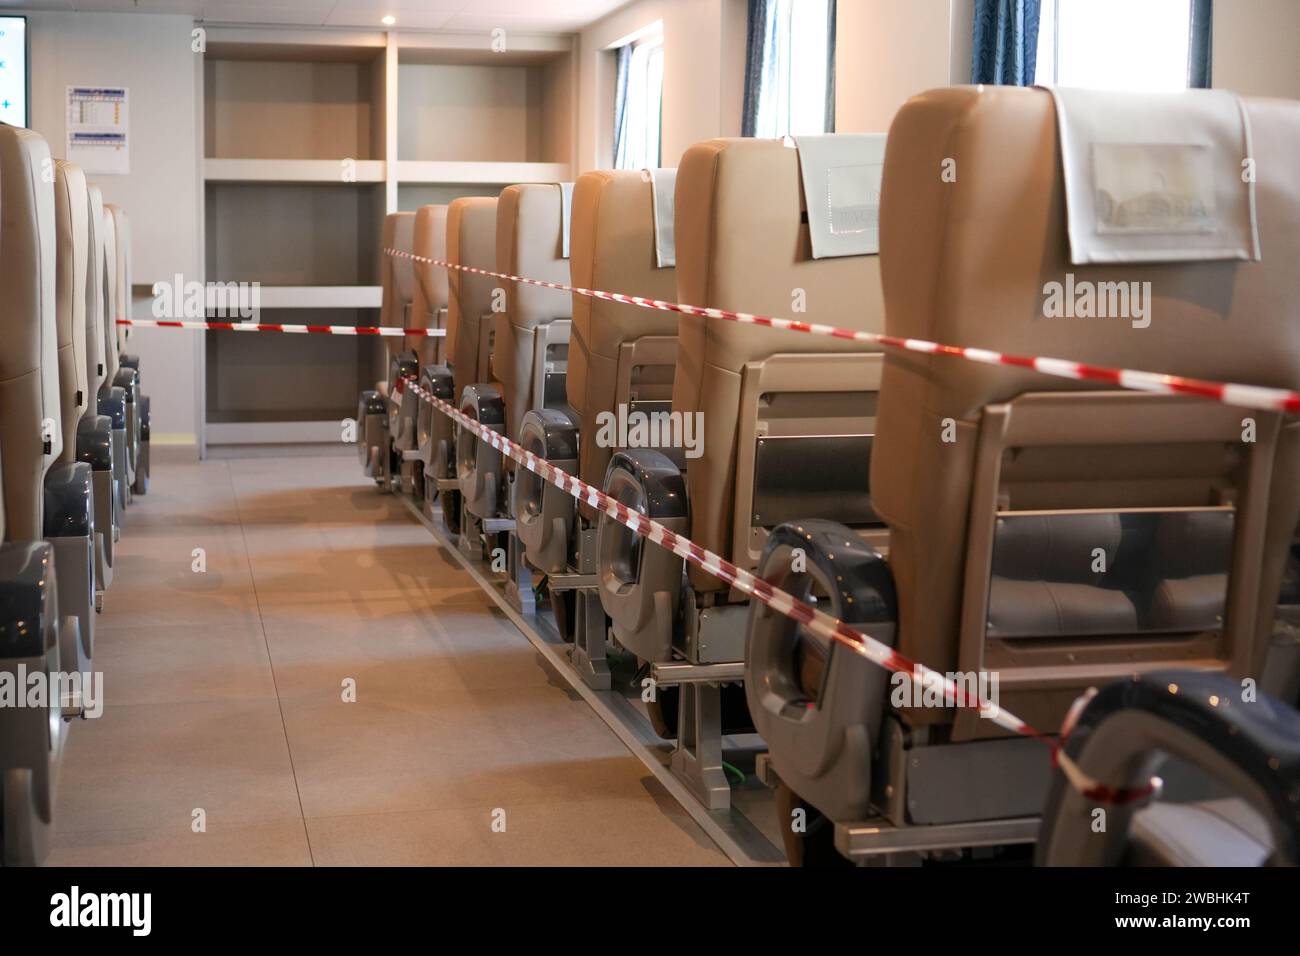 horizontal frame of a modern train car interior. The image showcases multiple rows of empty beige seats, sectioned off by red and white barrier tape i Stock Photo